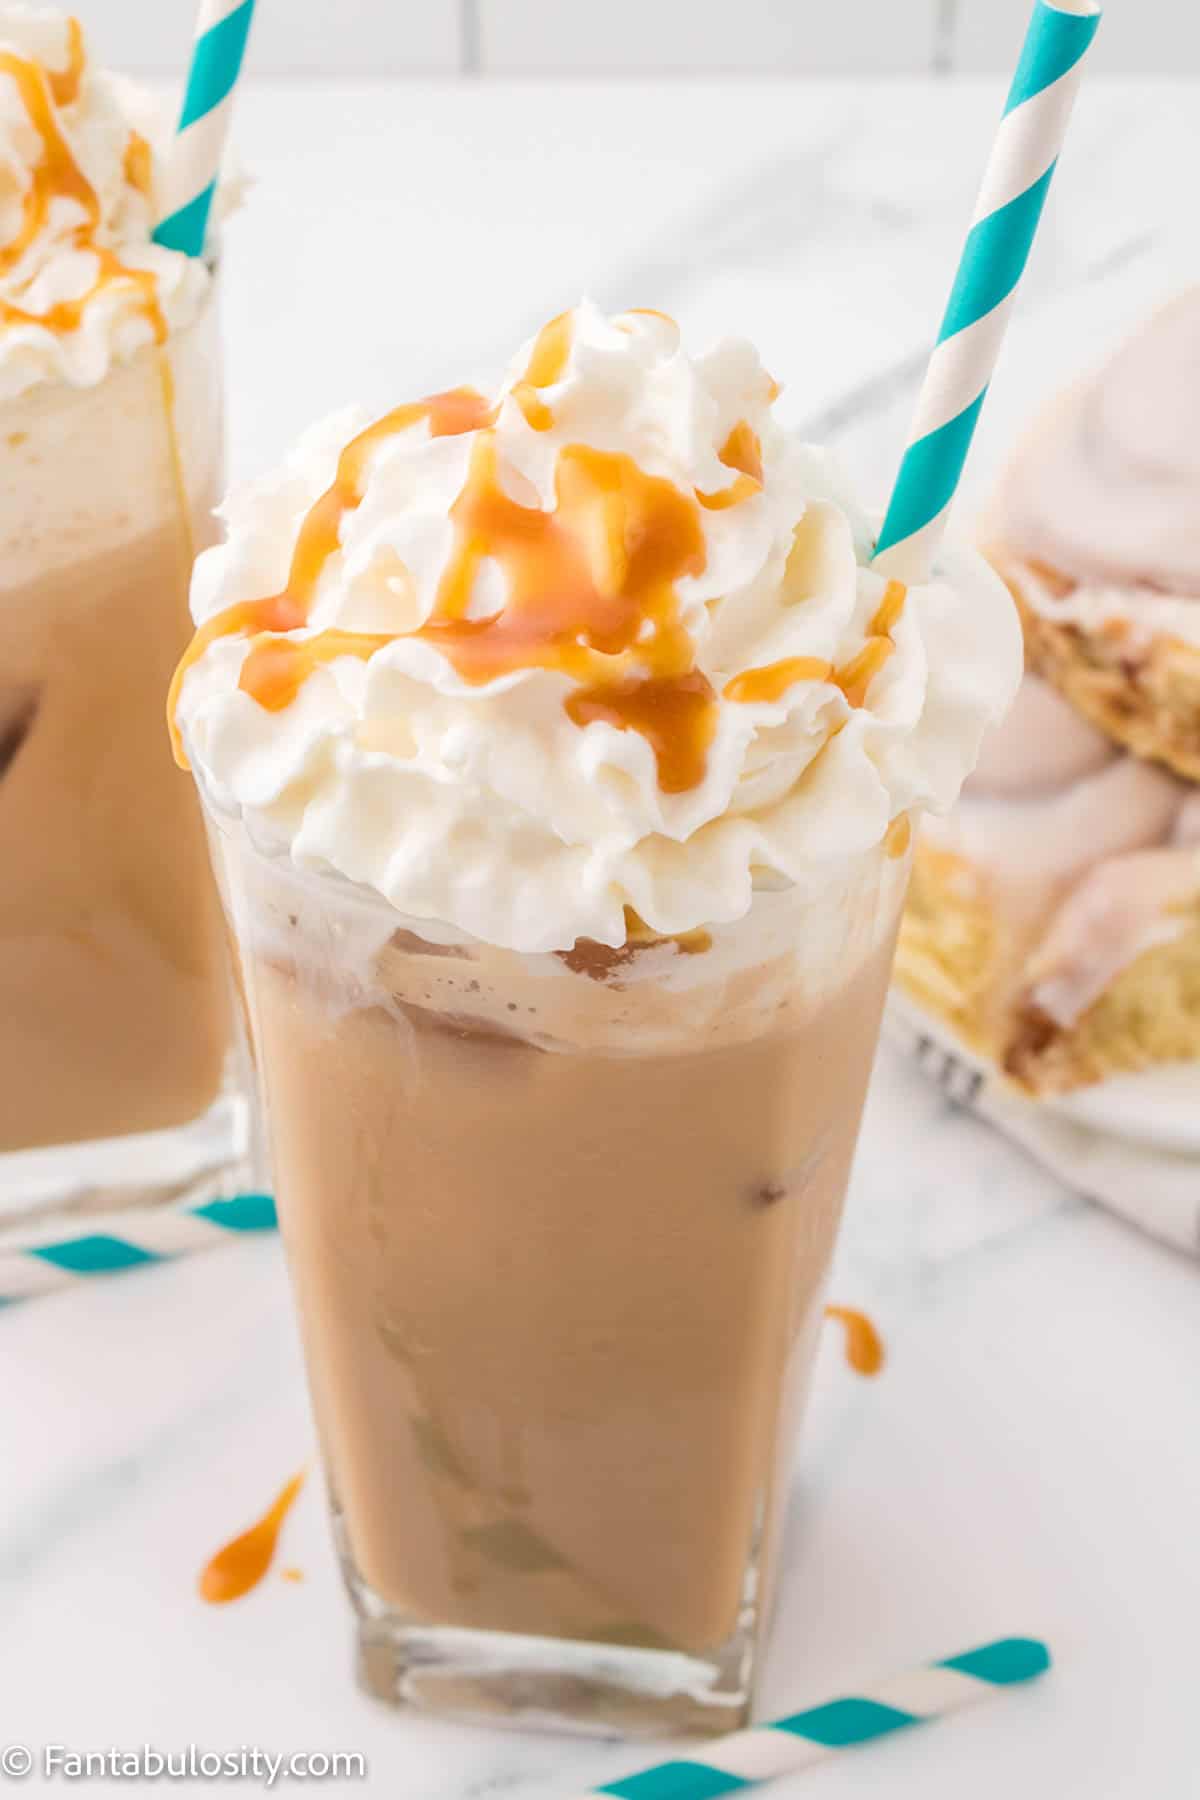 Close up photo of a glass of iced caramel latte, topped with whipped cream and caramel with a teal and white striped straw